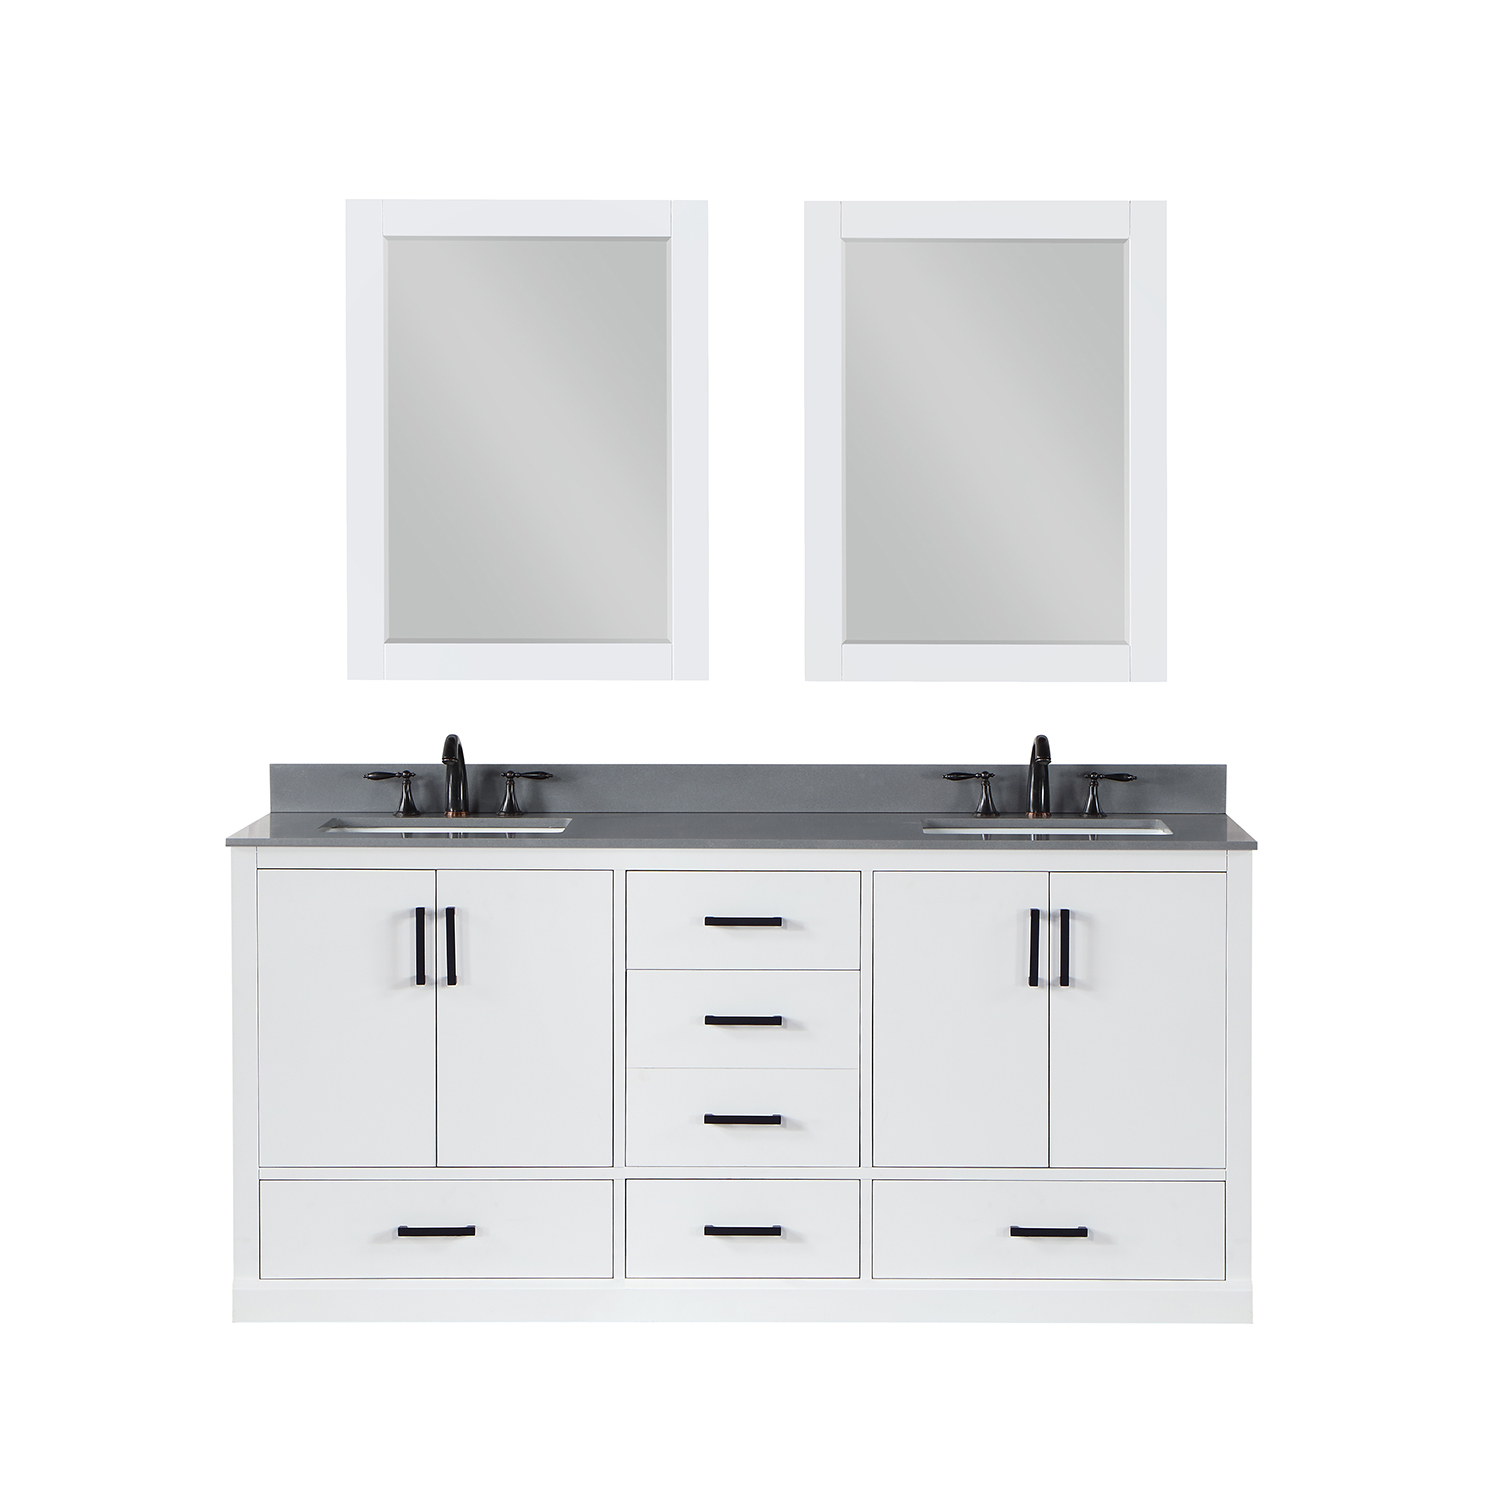 Issac Edwards Collection 72" Double Bathroom Vanity Set in White with Concrete Grey Composite Stone Countertop without Mirror 